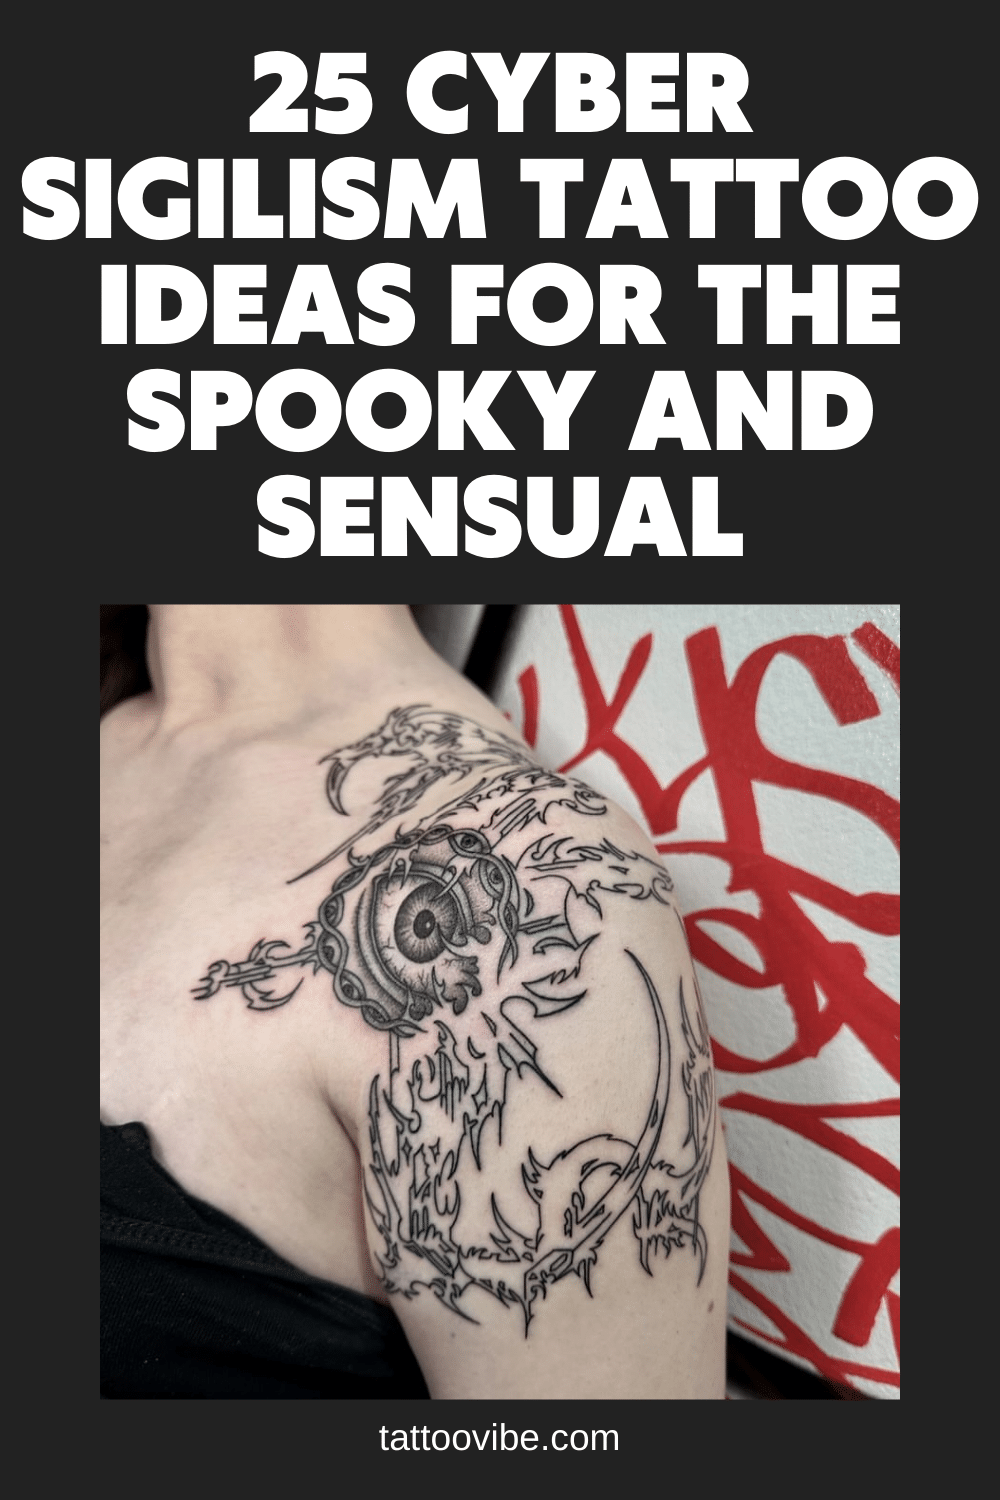 25 Cyber Sigilism Tattoo Ideas For The Spooky And Sensual